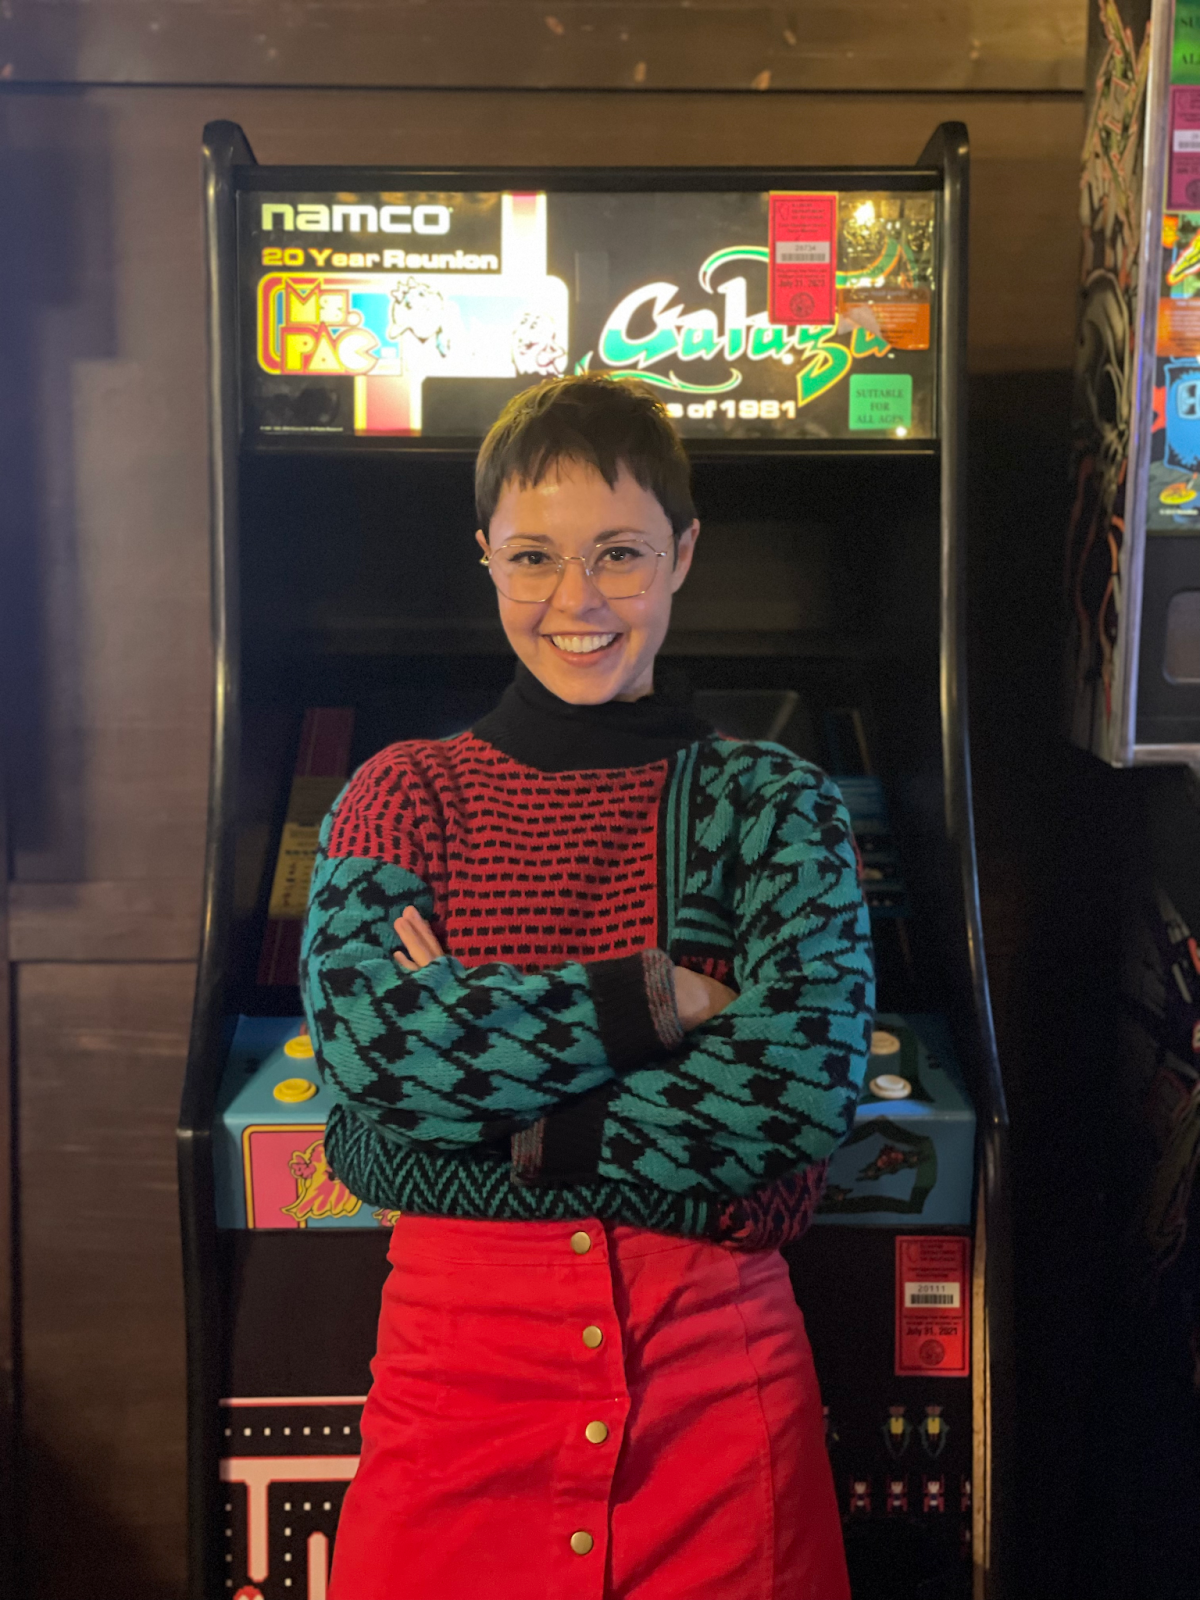 Oh hi, it's me Lauren standing in front of my favorite arcade game, Galaga, in a thrifted 90's patterned sweater and red button up skirt.